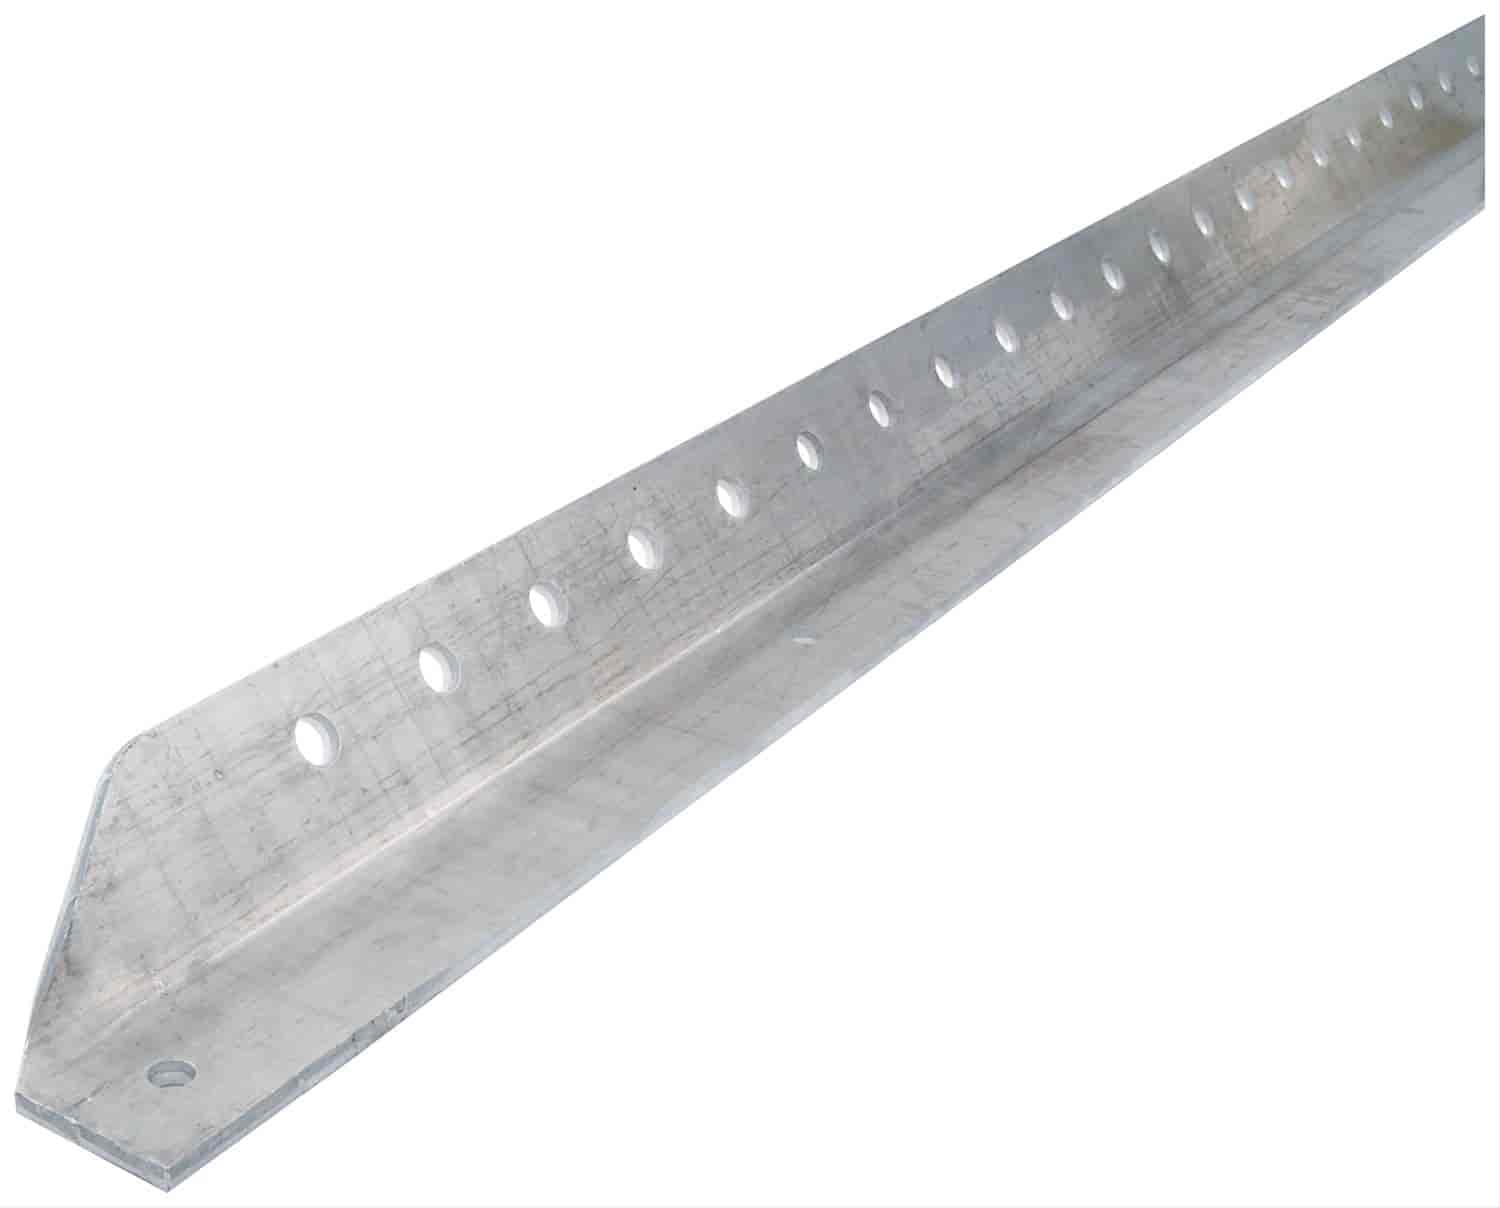 Slotted Angle Aluminum 30" Long x 1" Wide x 1/8" Thick